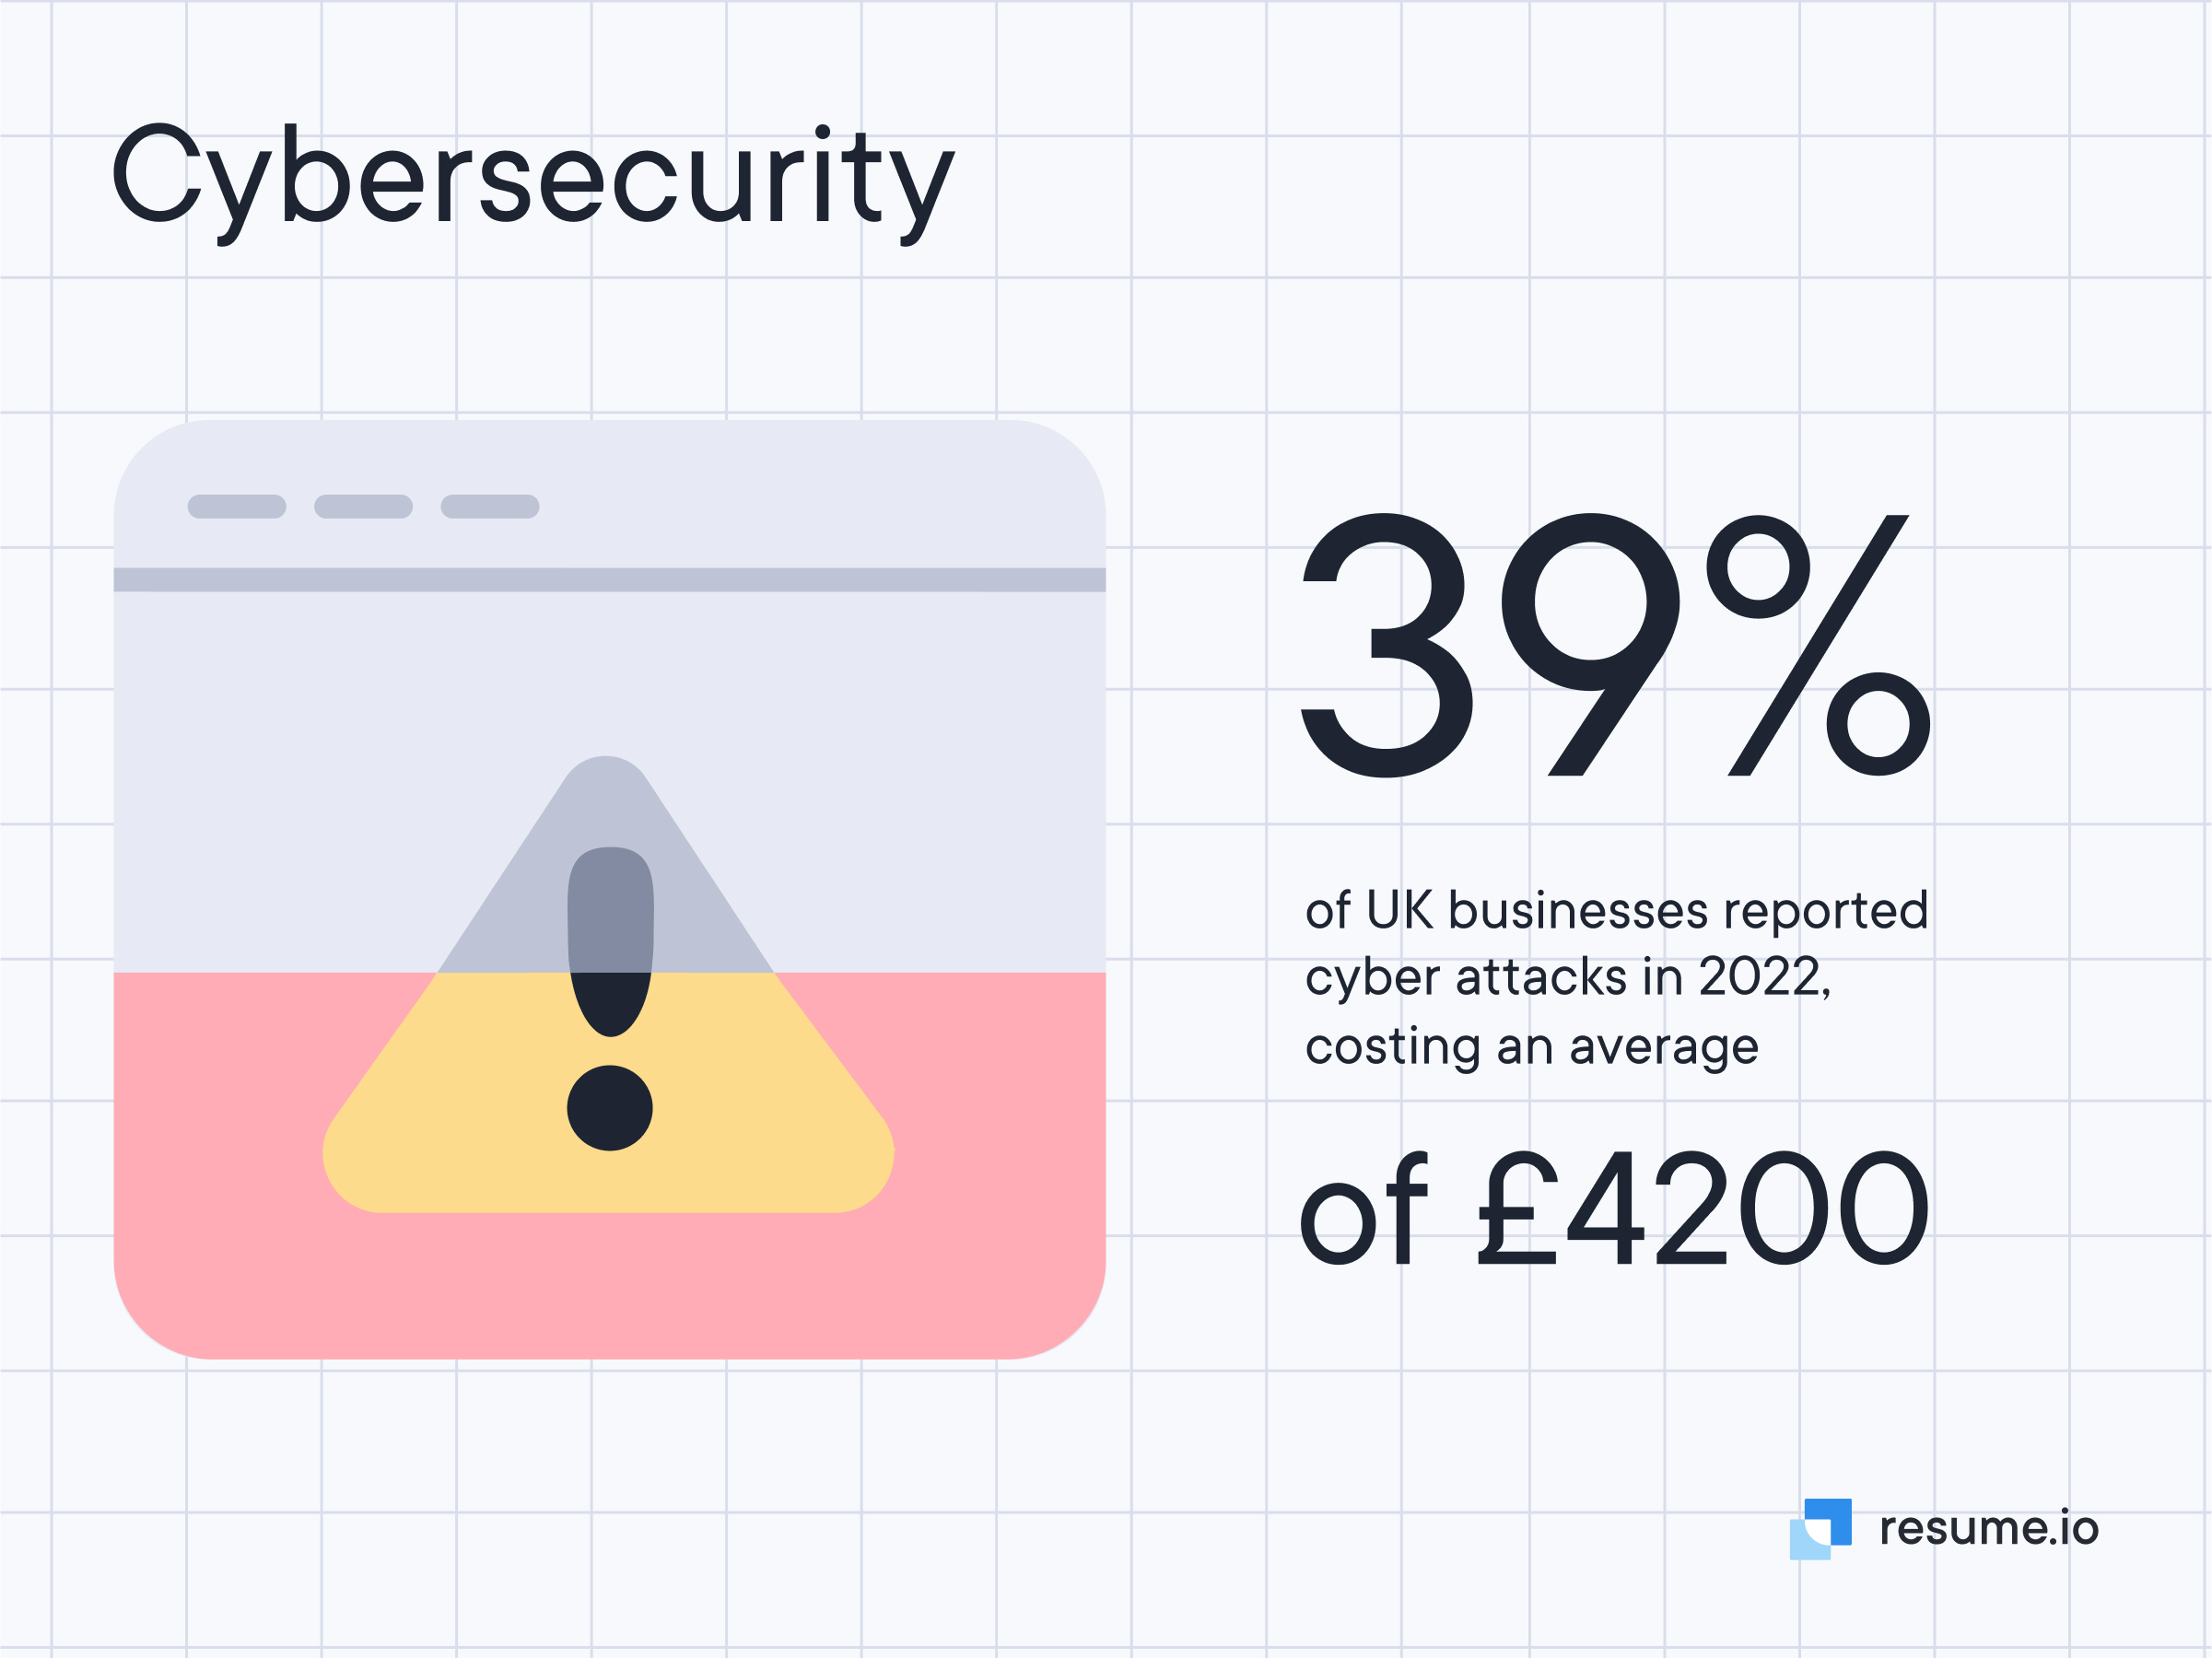 Cybersecurity attacks costs a lot of money for businesses